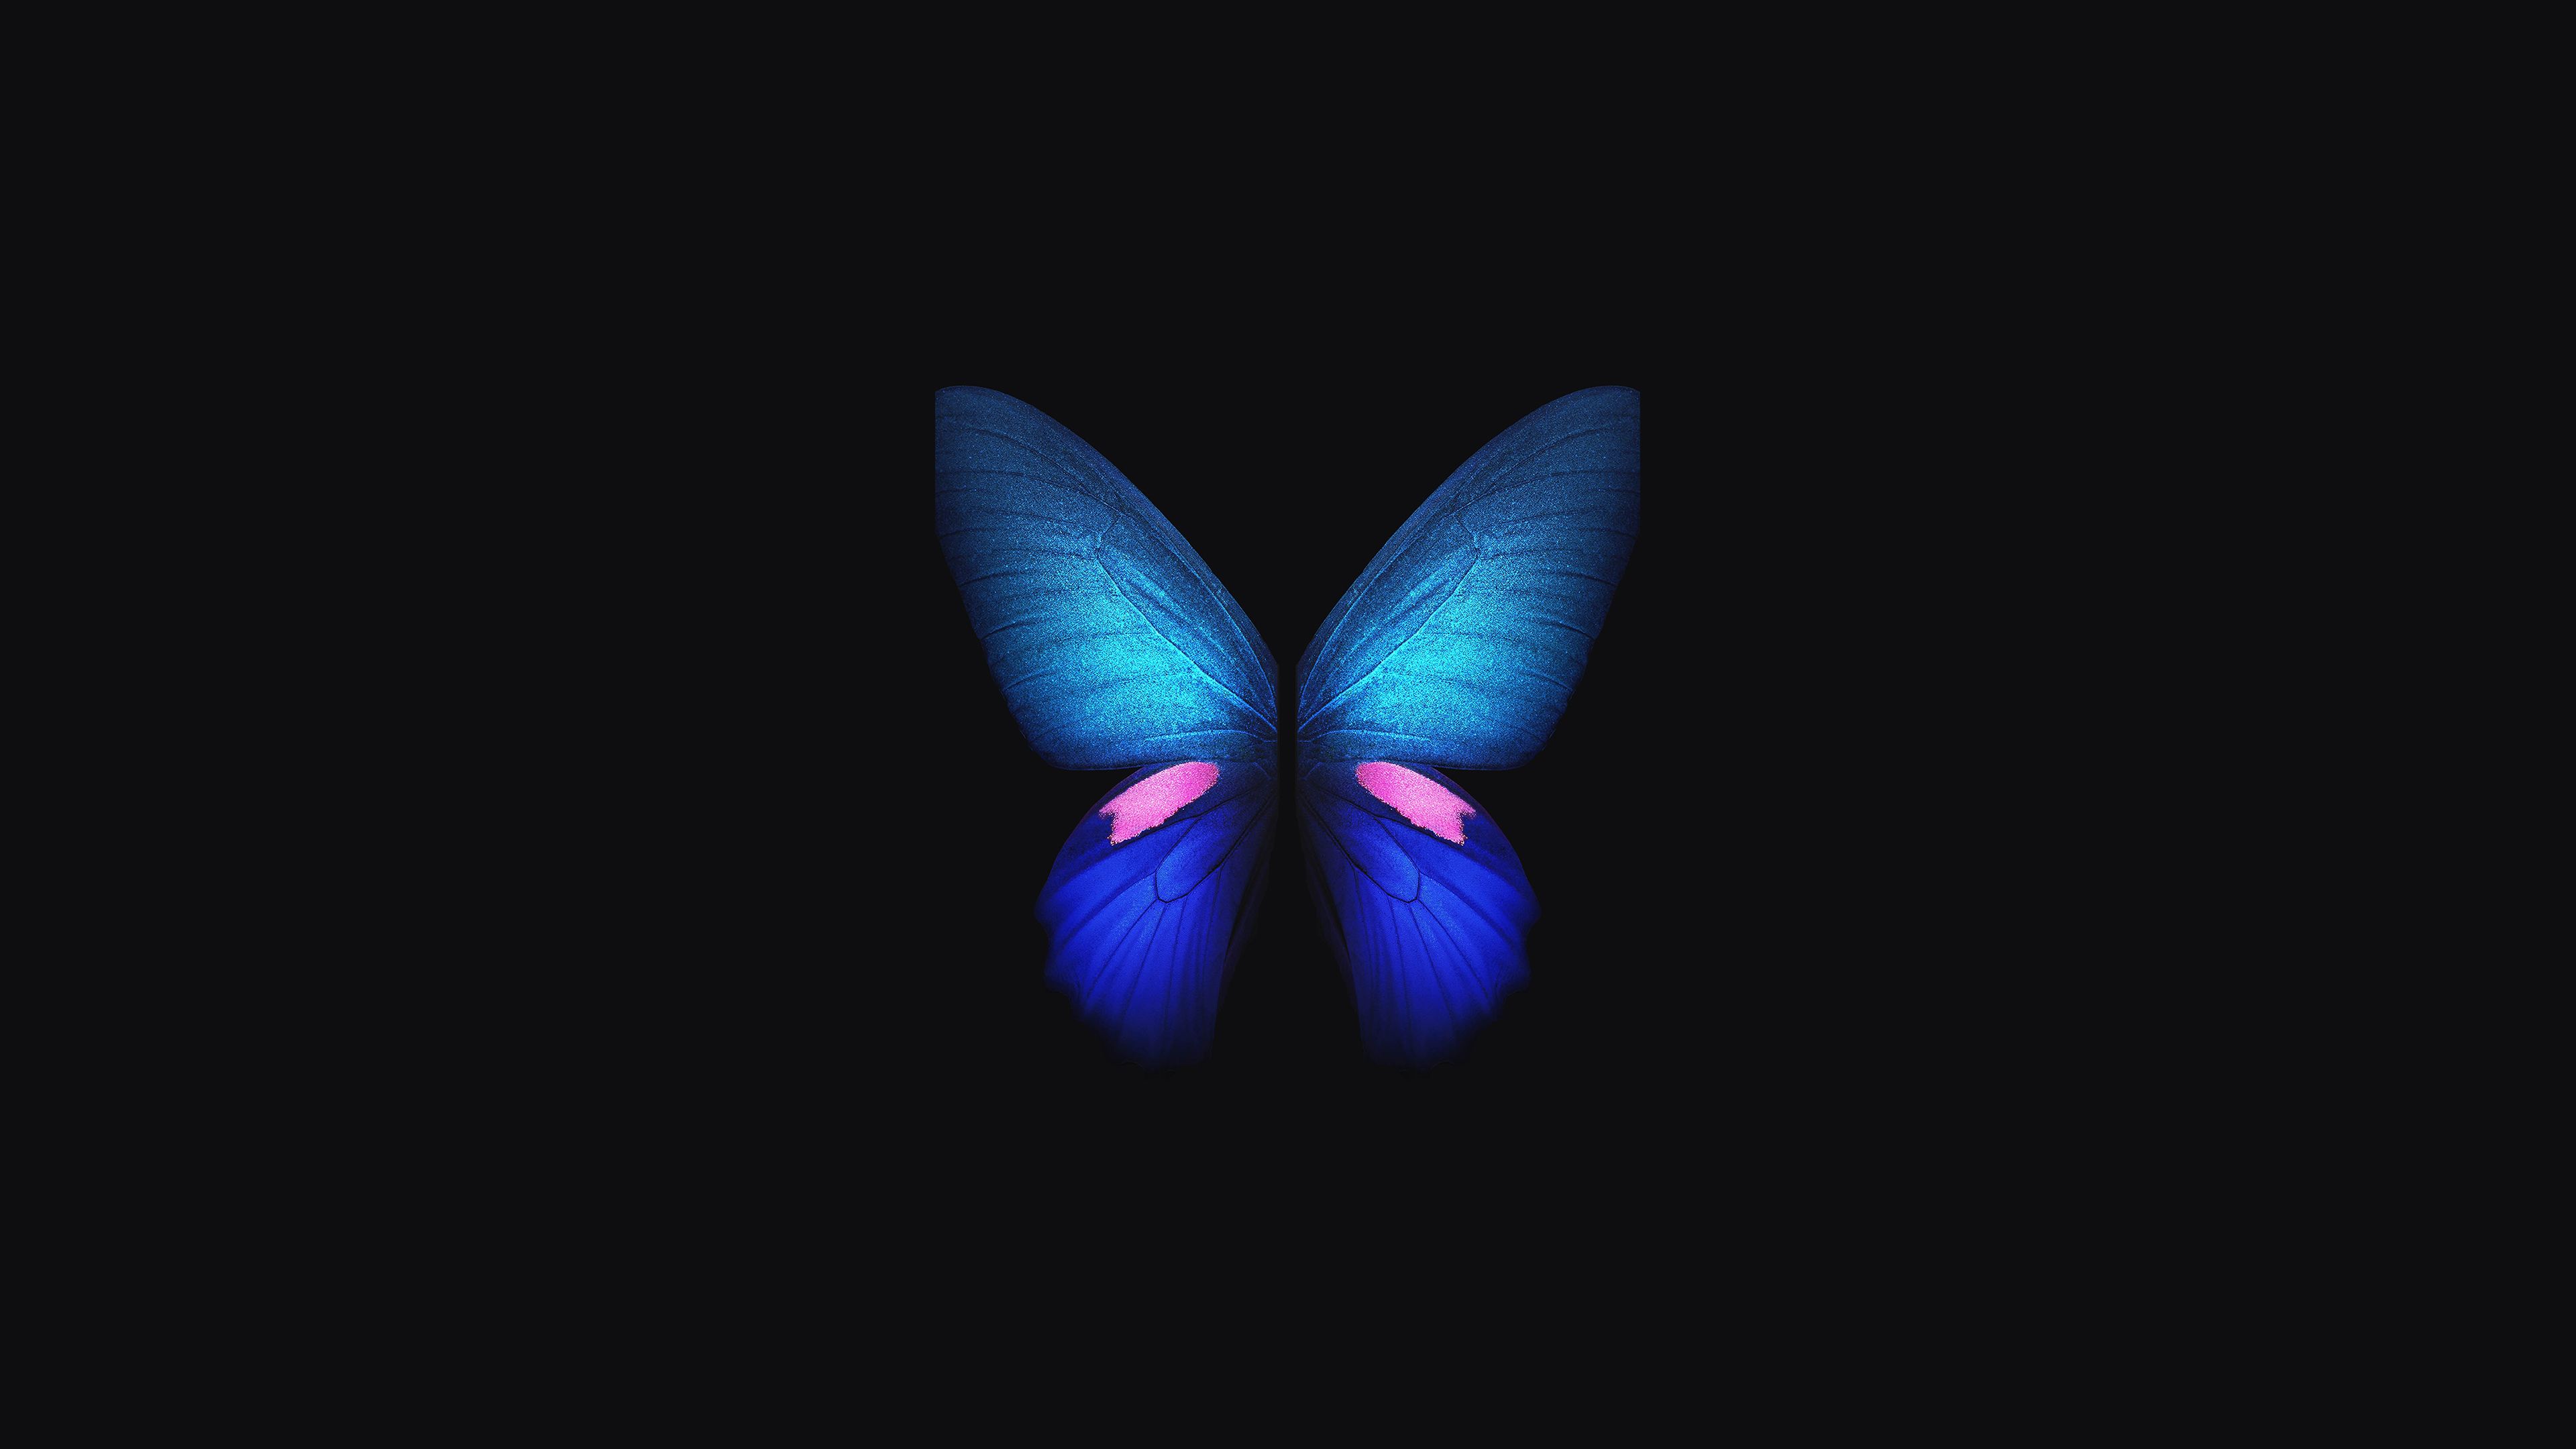 Samsung Galaxy Fold Stock, HD Artist, 4k Wallpaper, Image, Background, Photo and Picture